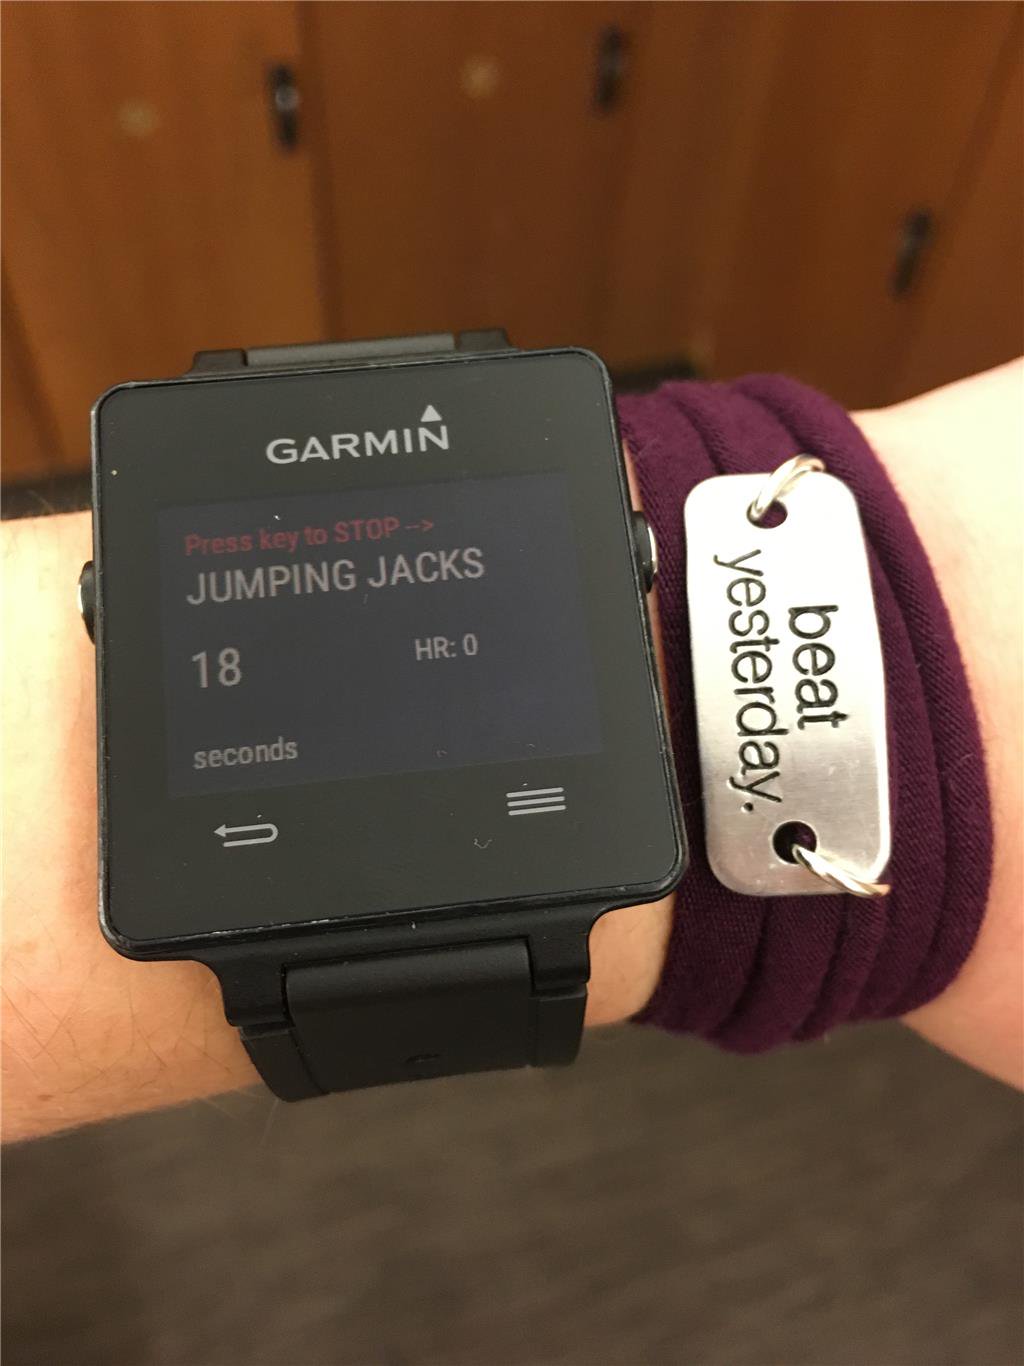 Velkendt Regeneration offset Garmin Fitness on Twitter: "Download the 7-Minute Workout Timer App from  the Connect IQ store for a full-body workout! https://t.co/BIpGWRP4no  https://t.co/Z6aq2f9QwE" / Twitter